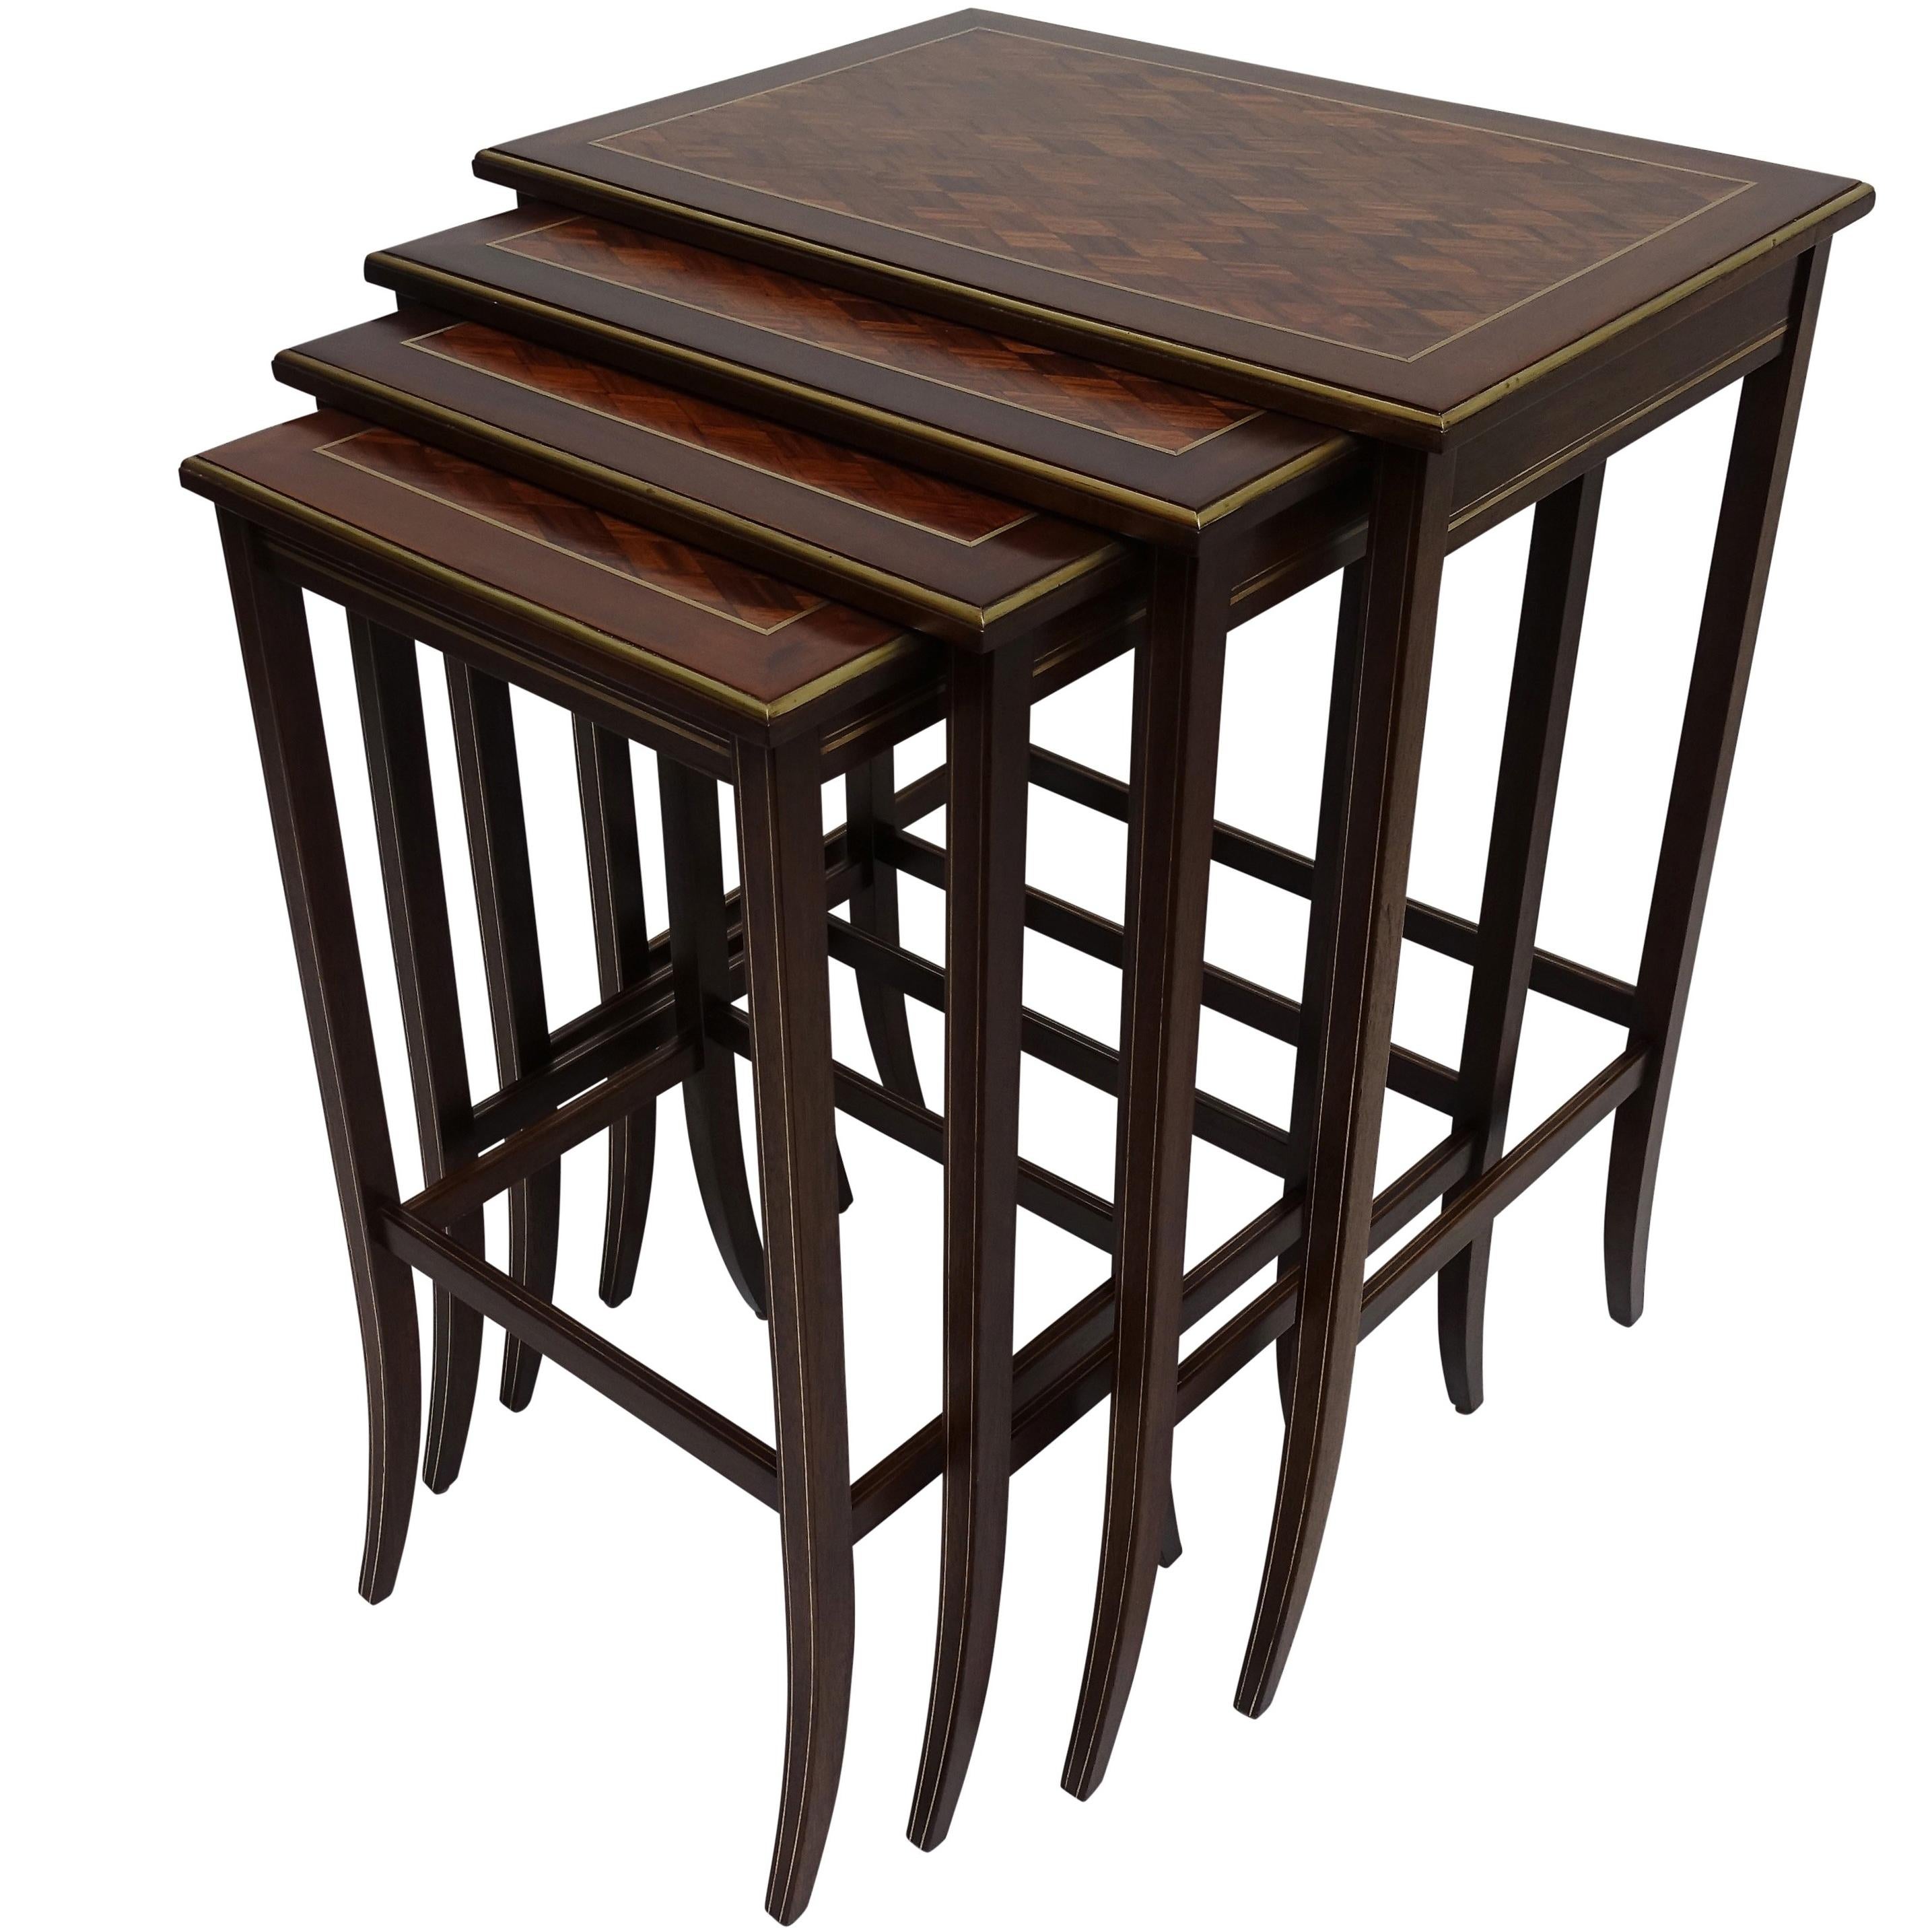 Set of Four Mahogany Nesting Tables with Brass Inlay and Trim, Mid-20th Century For Sale